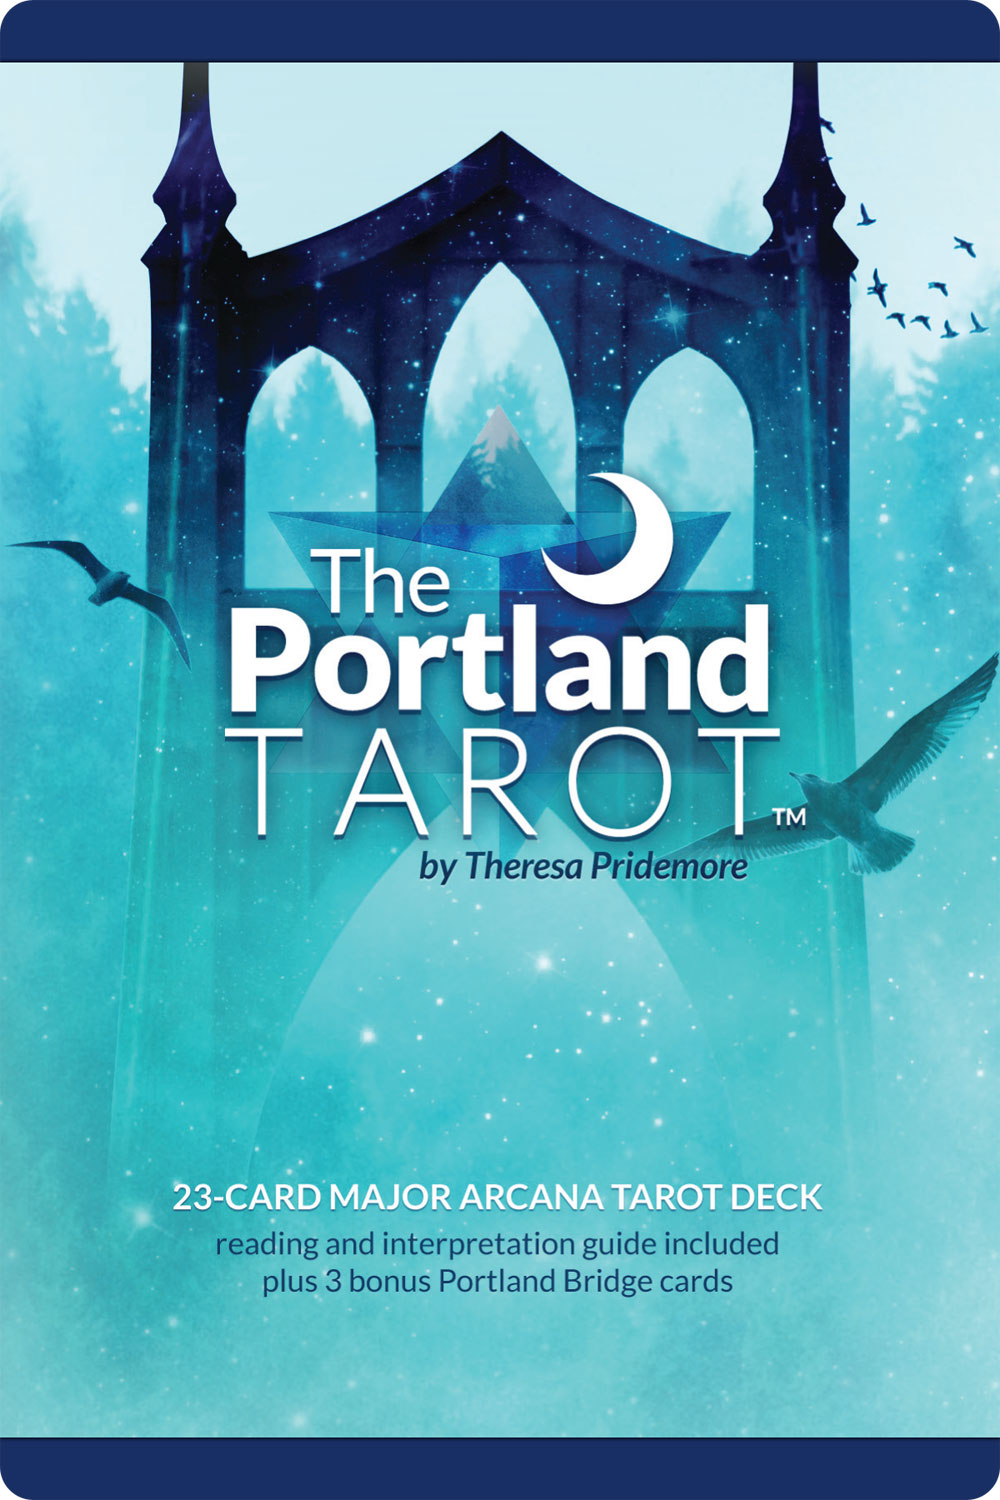 The Portland Tarot front retail package